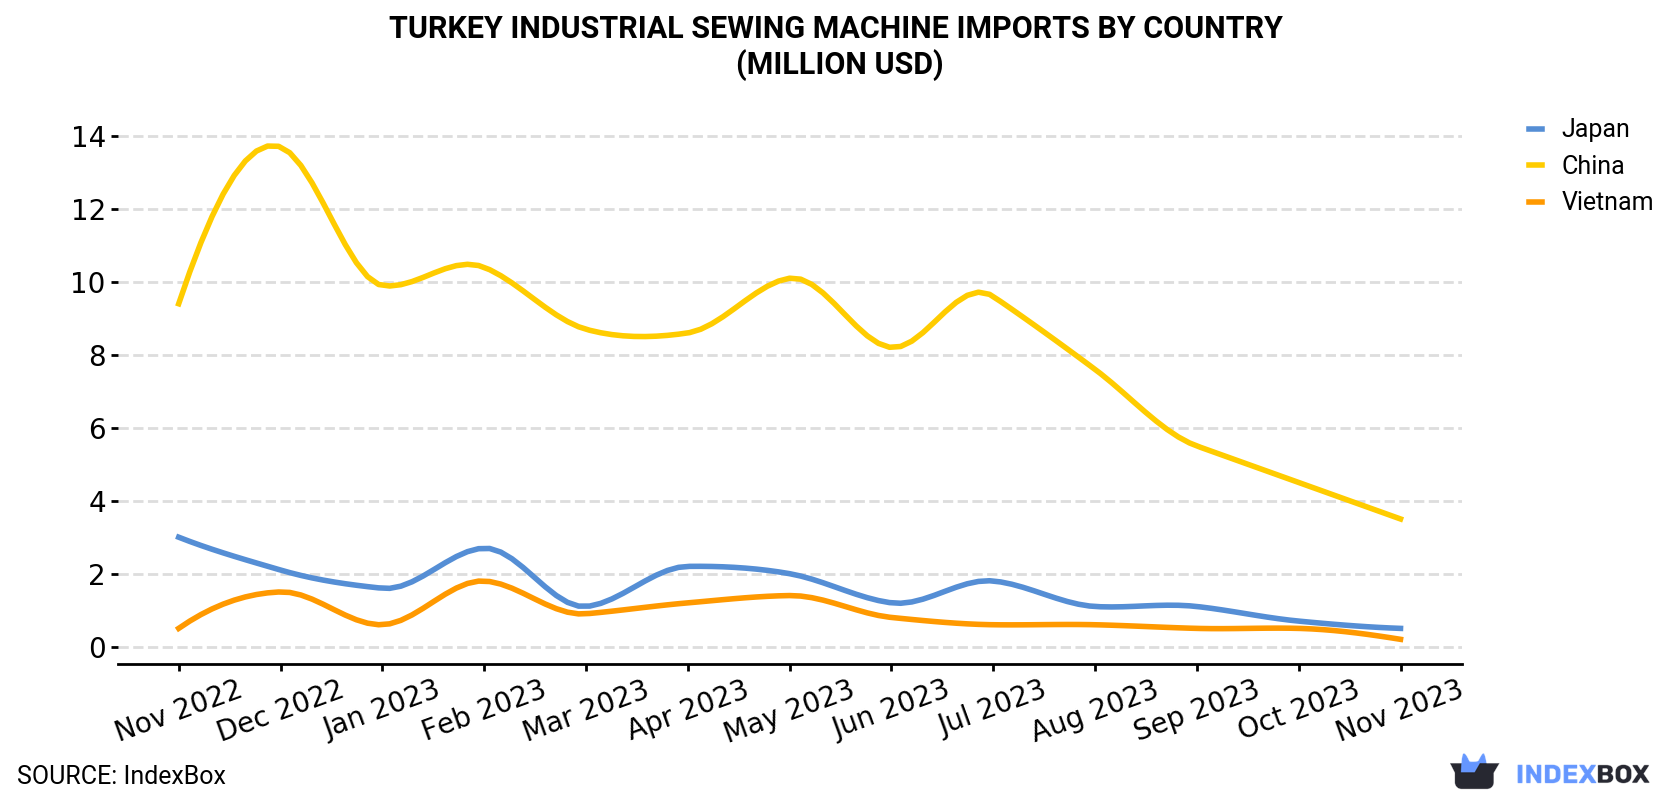 Turkey Industrial Sewing Machine Imports By Country (Million USD)